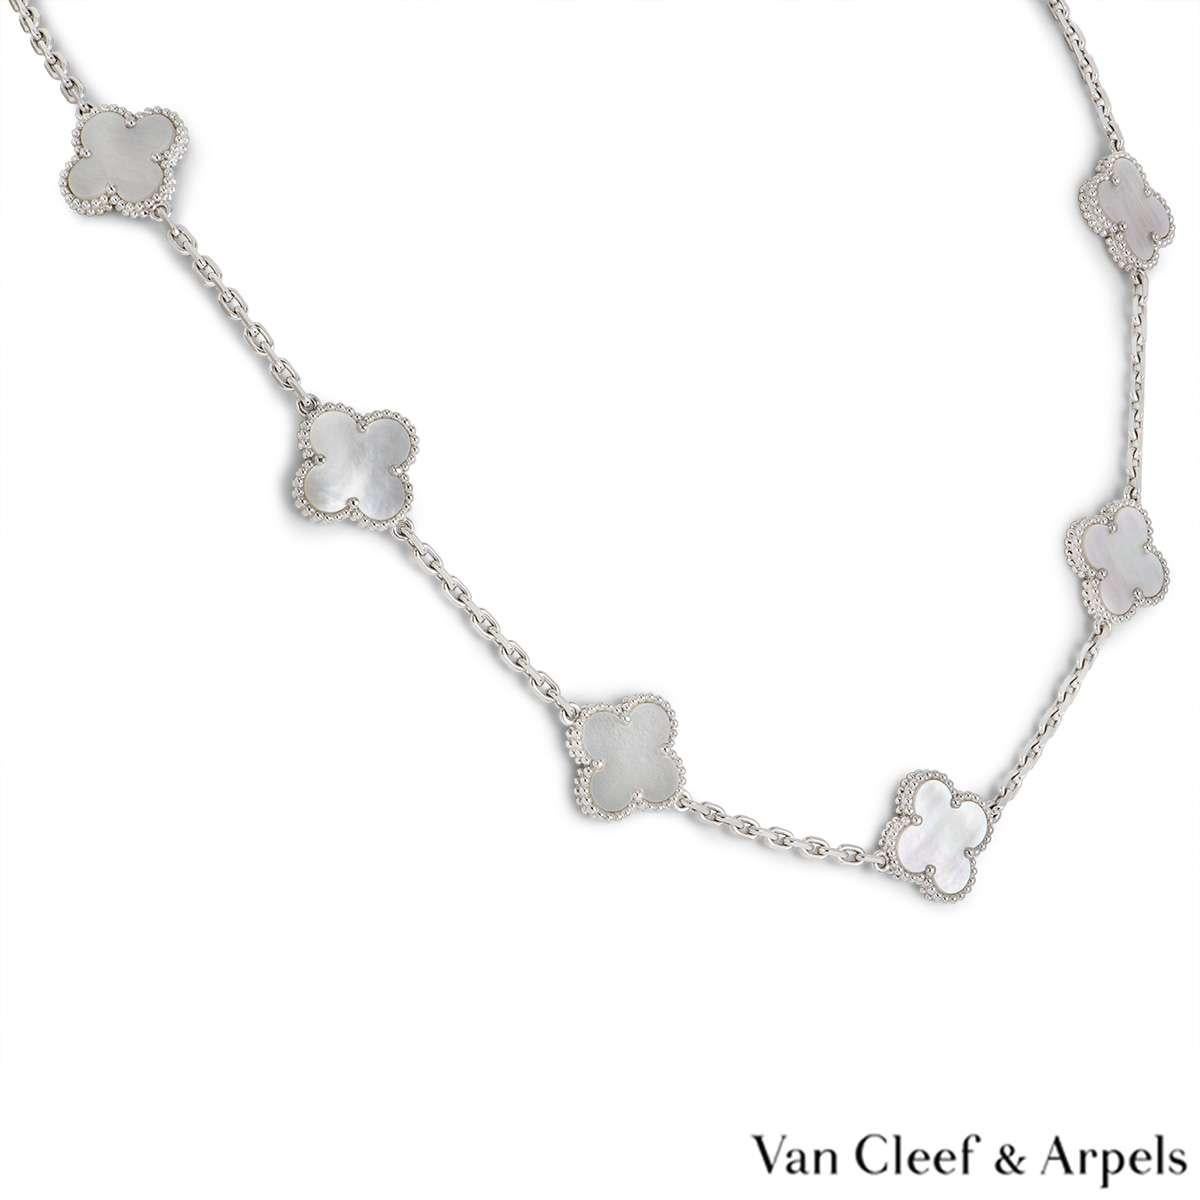 An 18k white gold Vintage Alhambra necklace by Van Cleef & Arpels. The necklace has 10 motifs, each set with a mother of pearl inlay and complemented by a beaded outer edge. The necklace measures 17 inches in length, features a lobster clasp and has